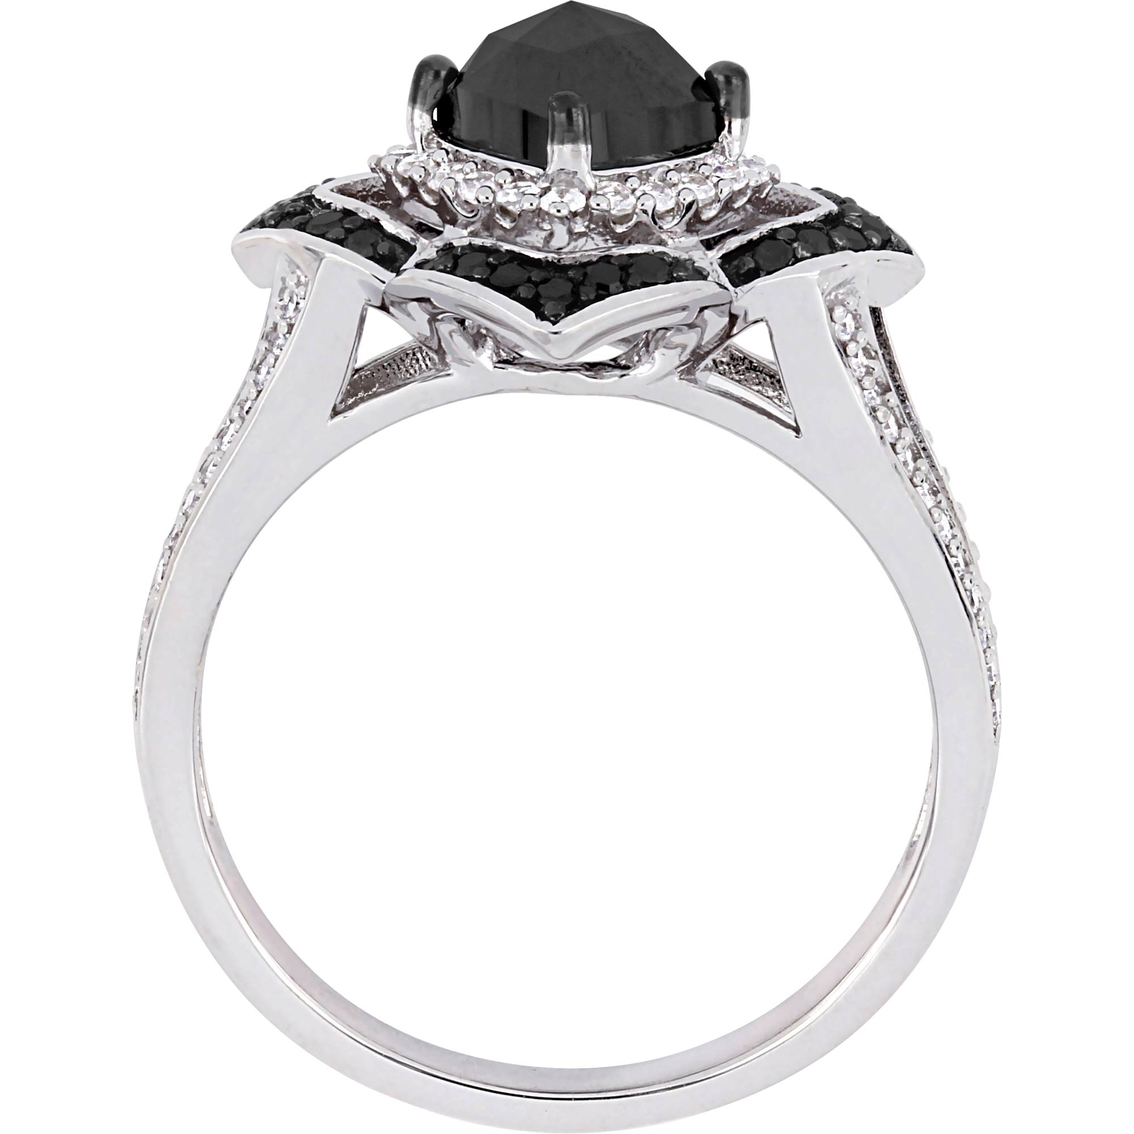 Diamore Sterling Silver 1 2/5 CTW Black and White Diamond Halo Ring - Image 3 of 4